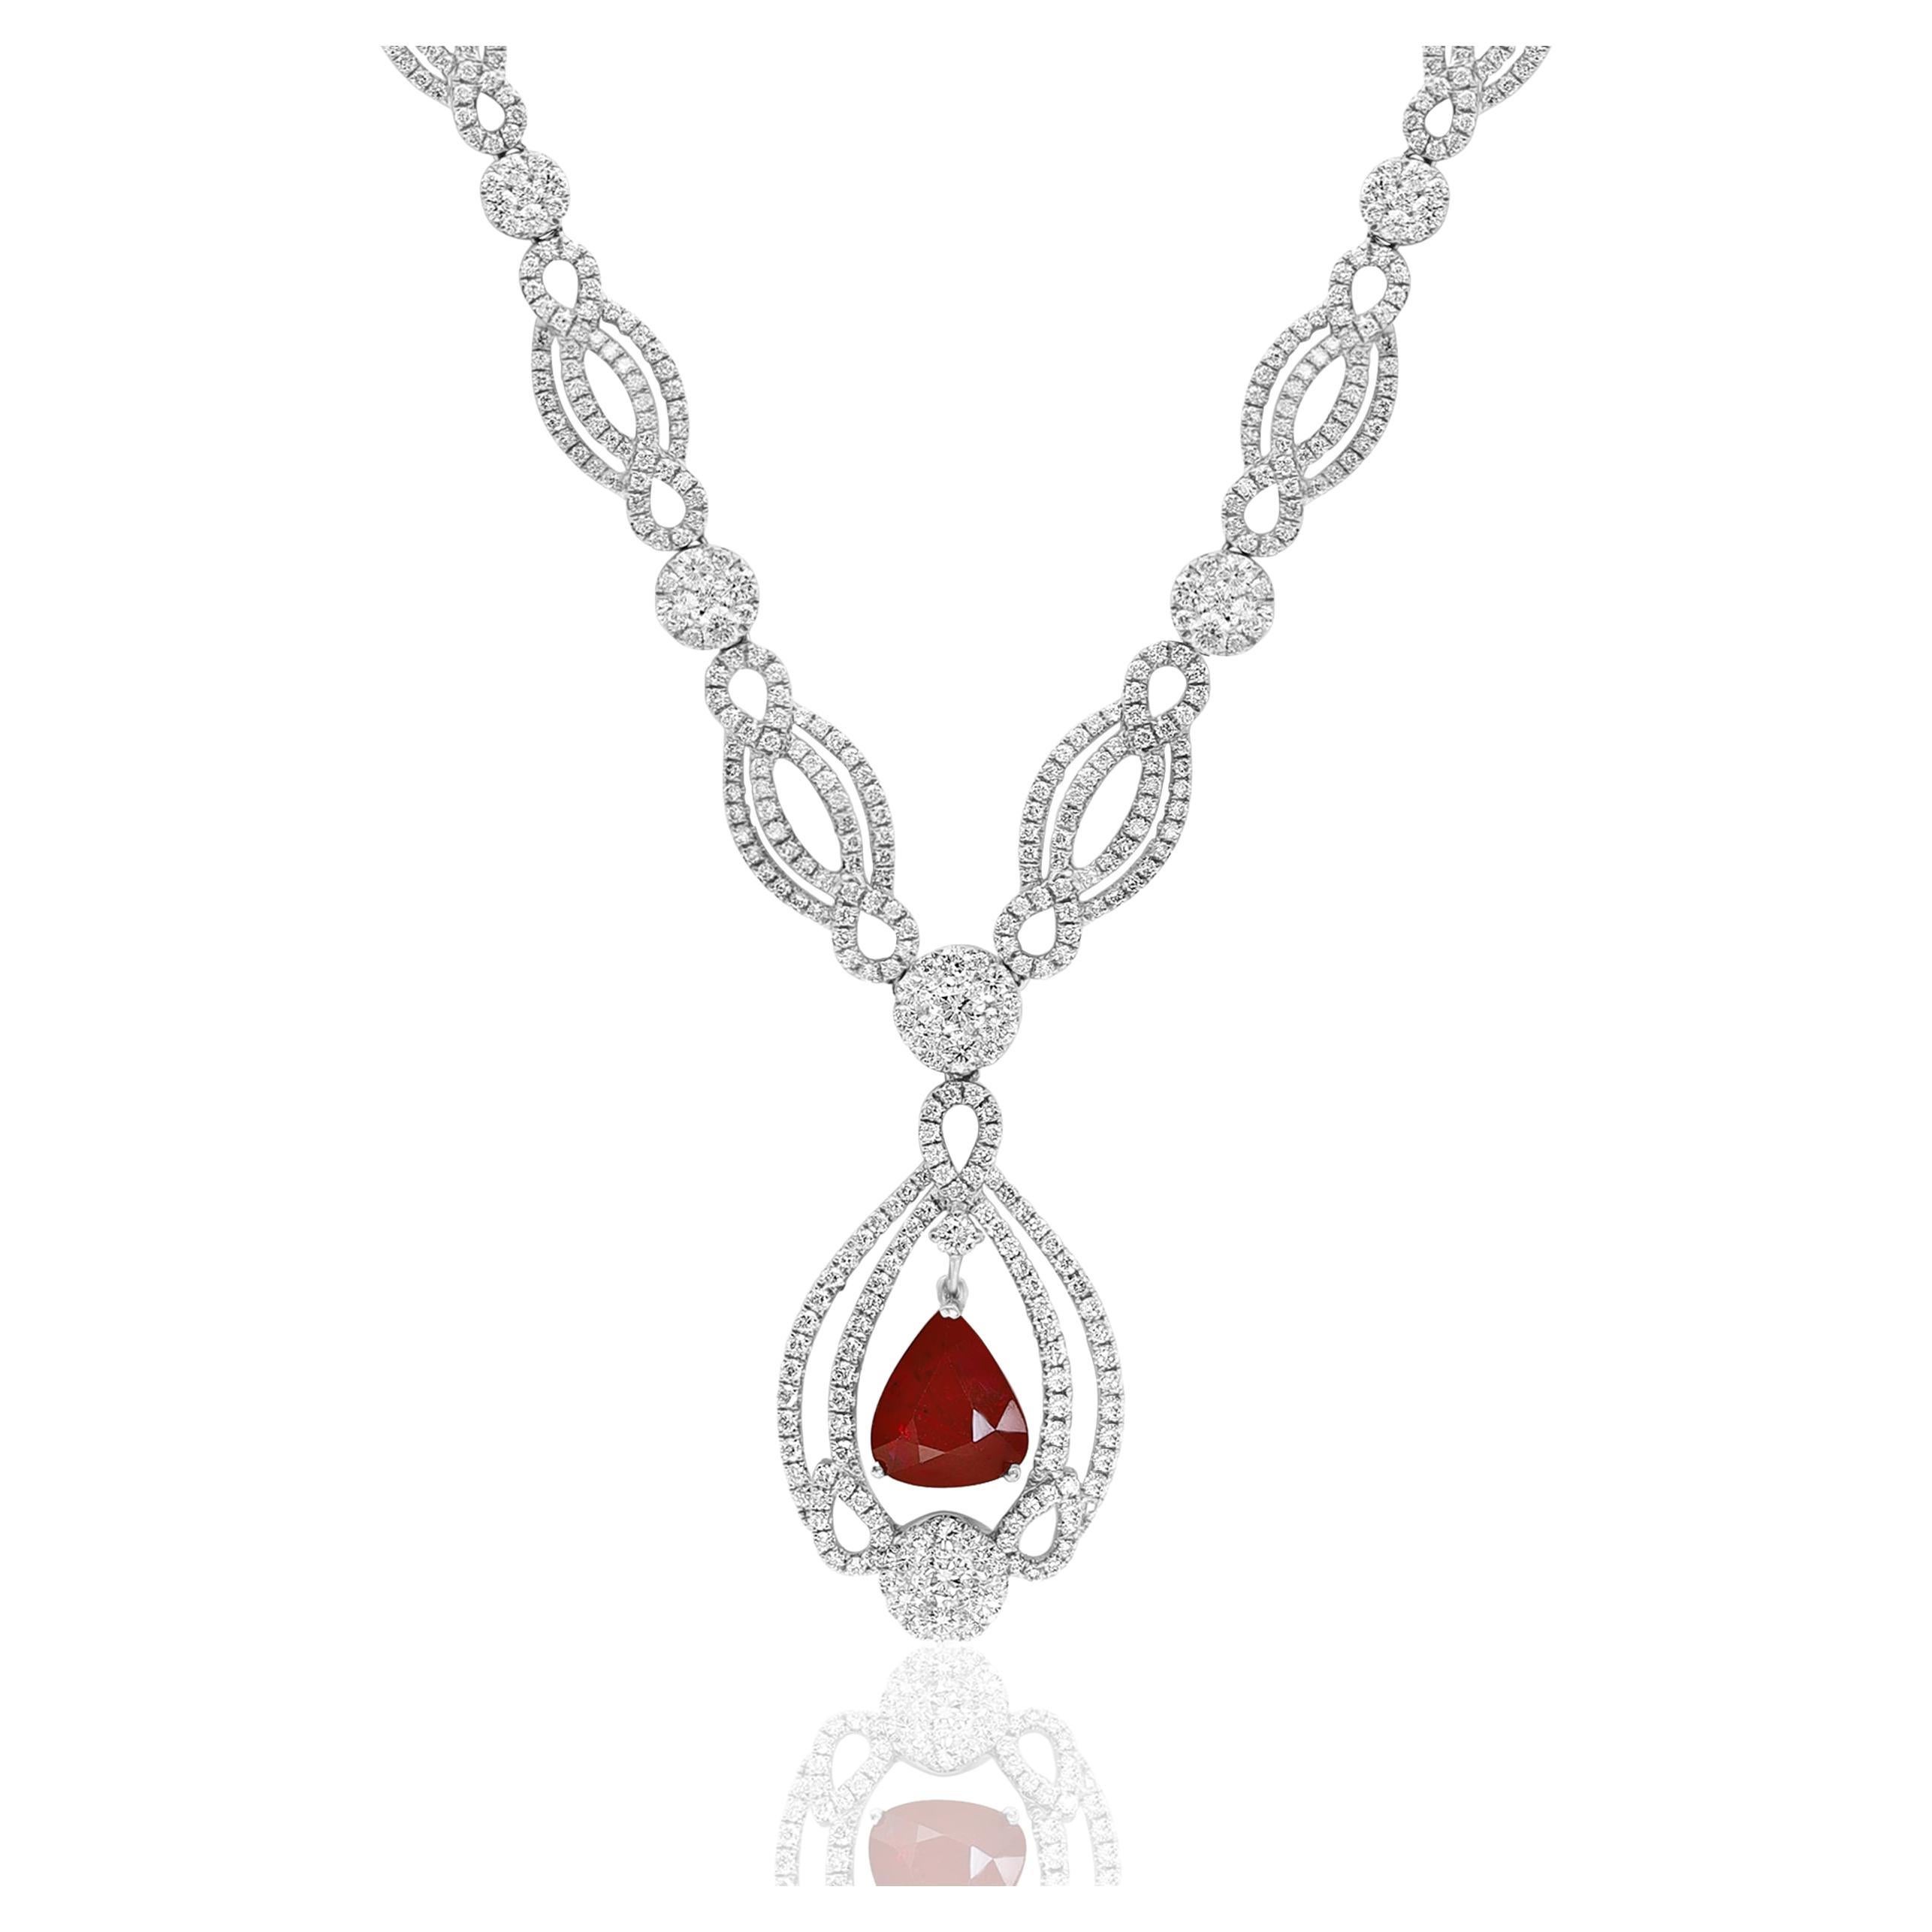 3.52 Carat Pear Shape Ruby and Diamond Necklace in 18 White Gold For Sale